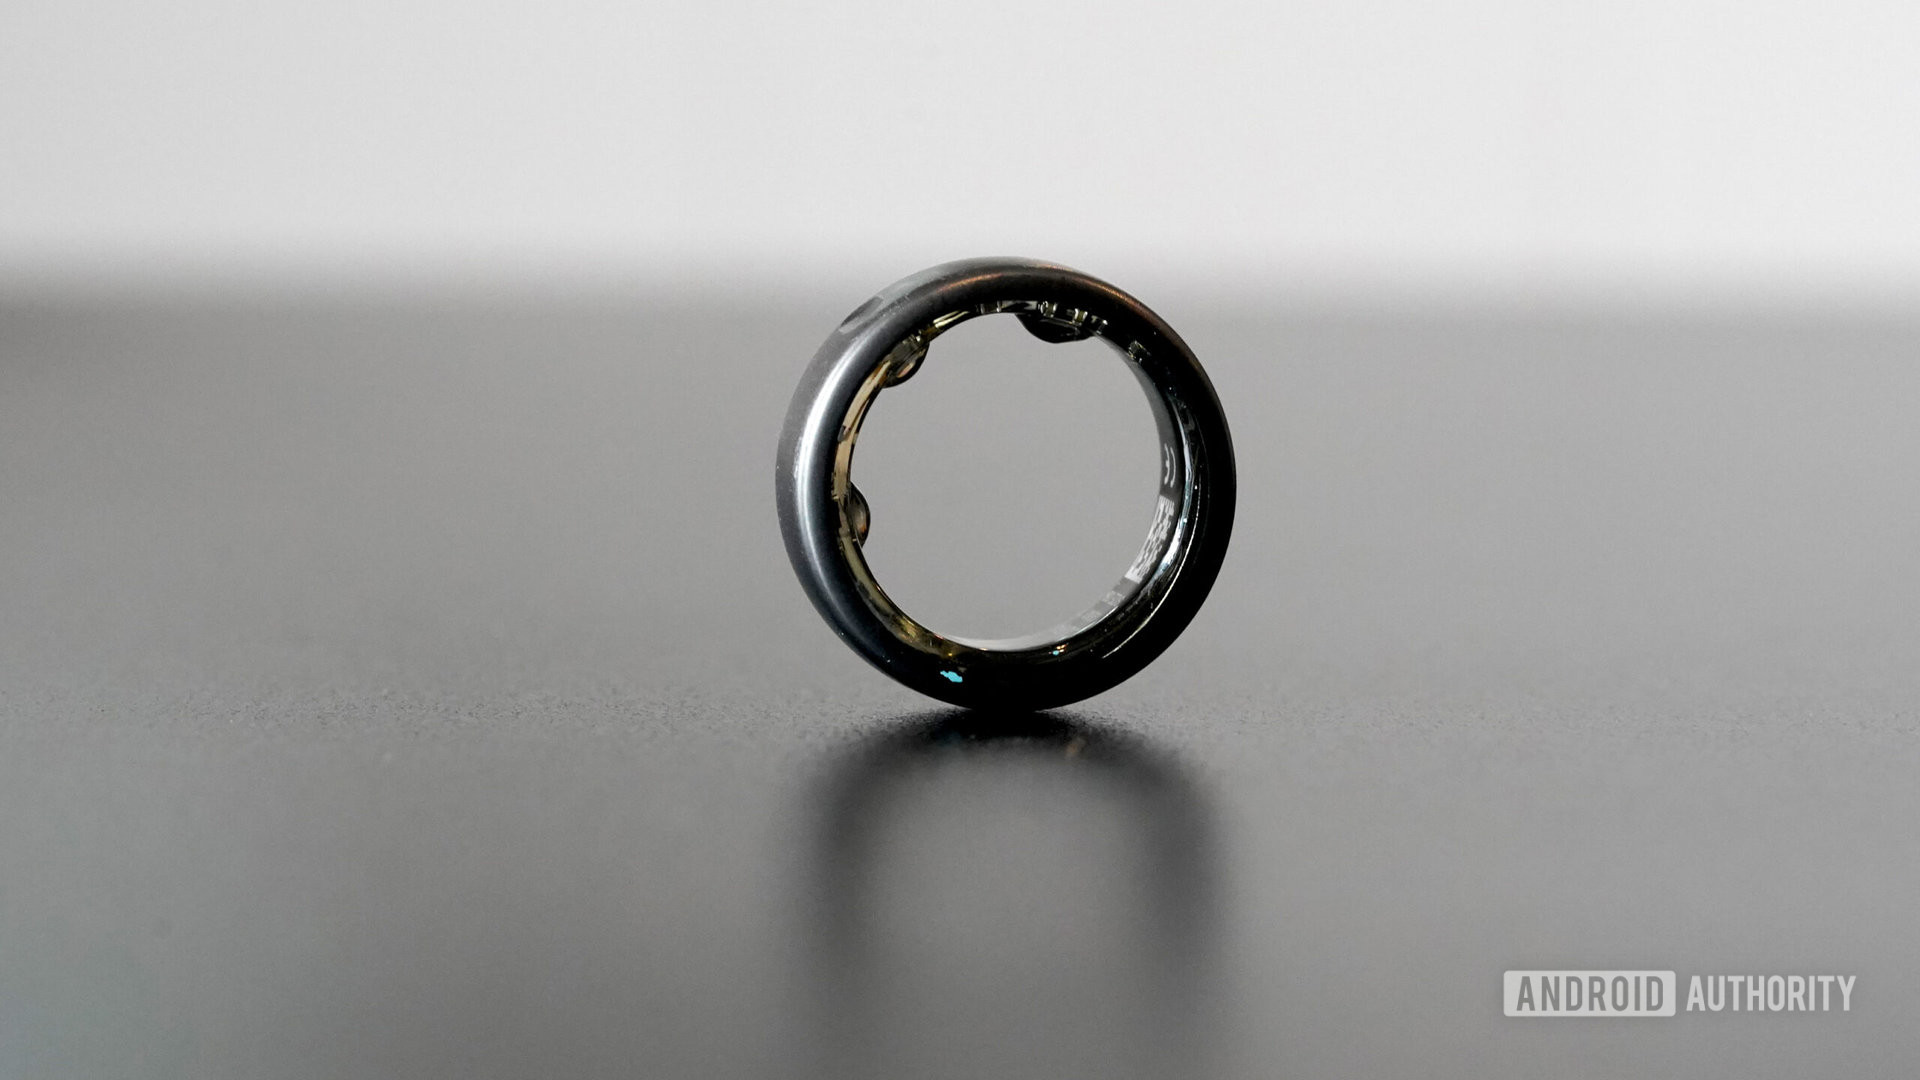 The Oura Ring is getting even smarter with Lifesum sleep and nutrition tracking